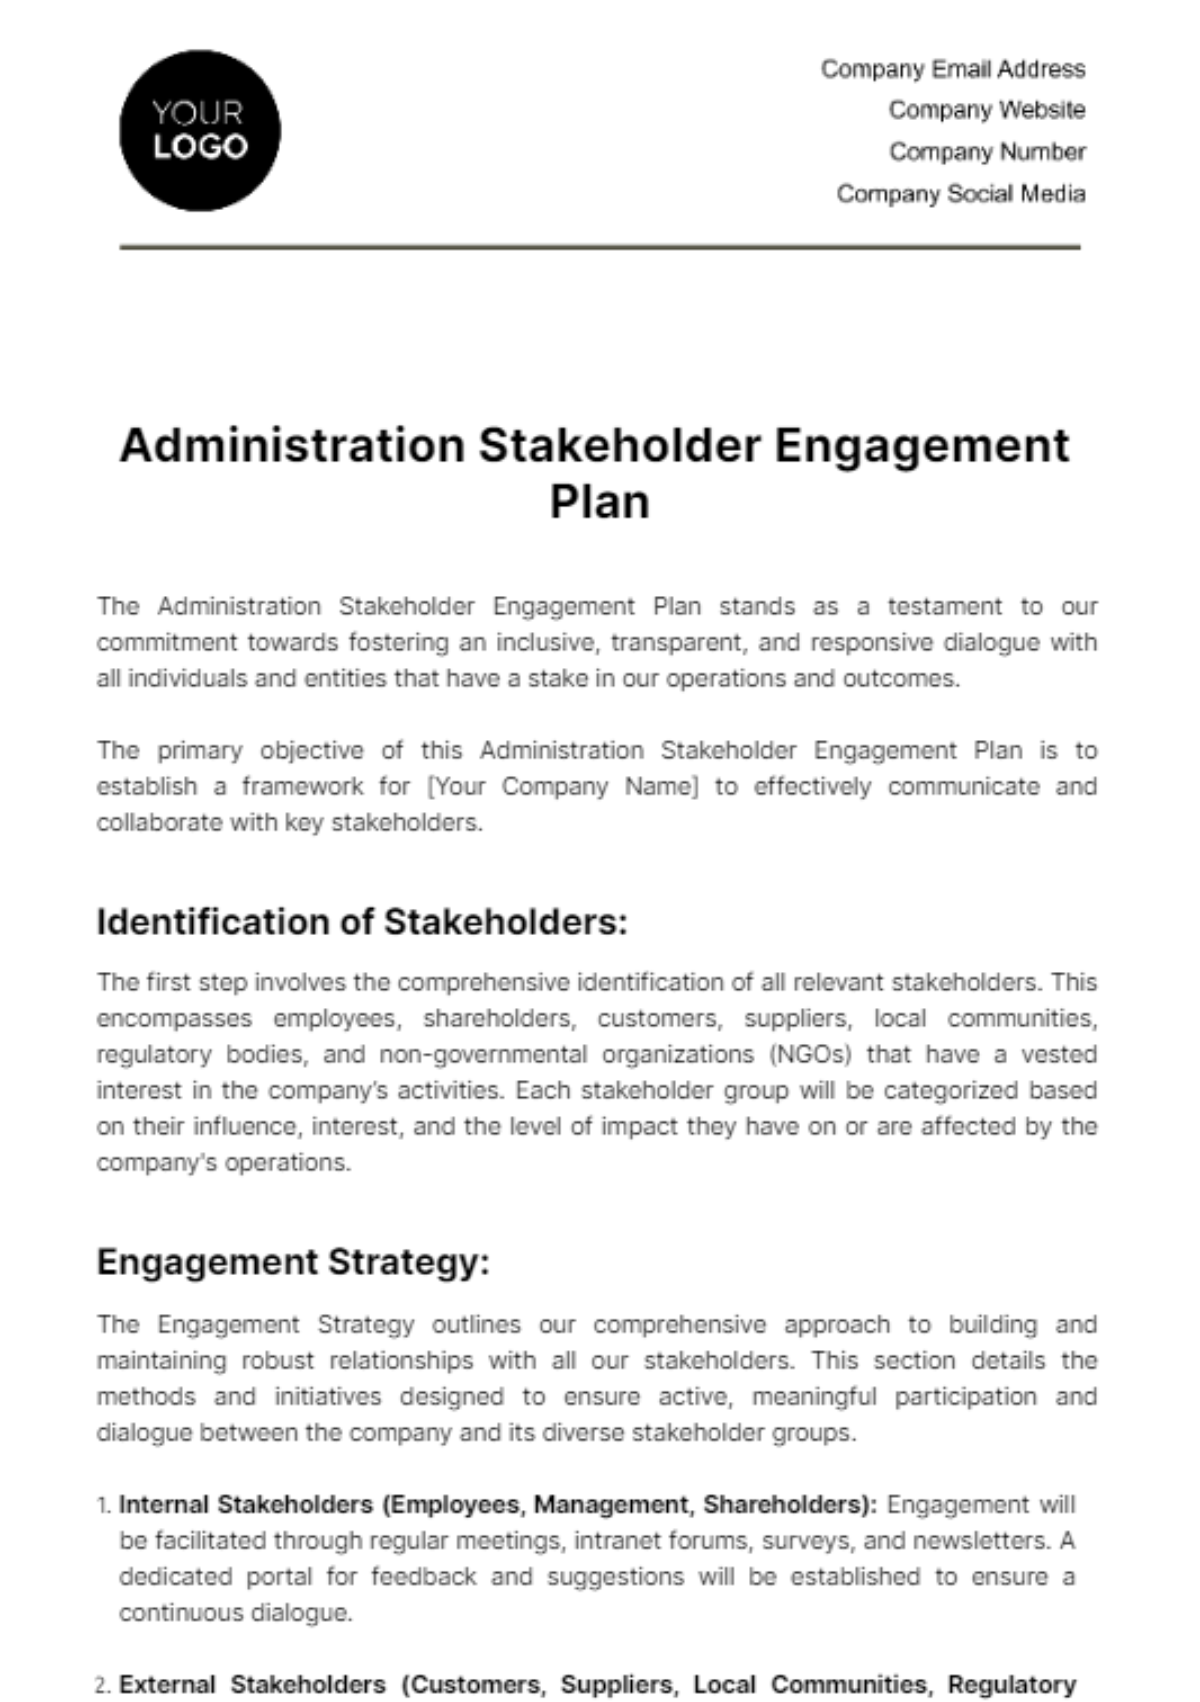 Free Administration Stakeholder Engagement Plan Template